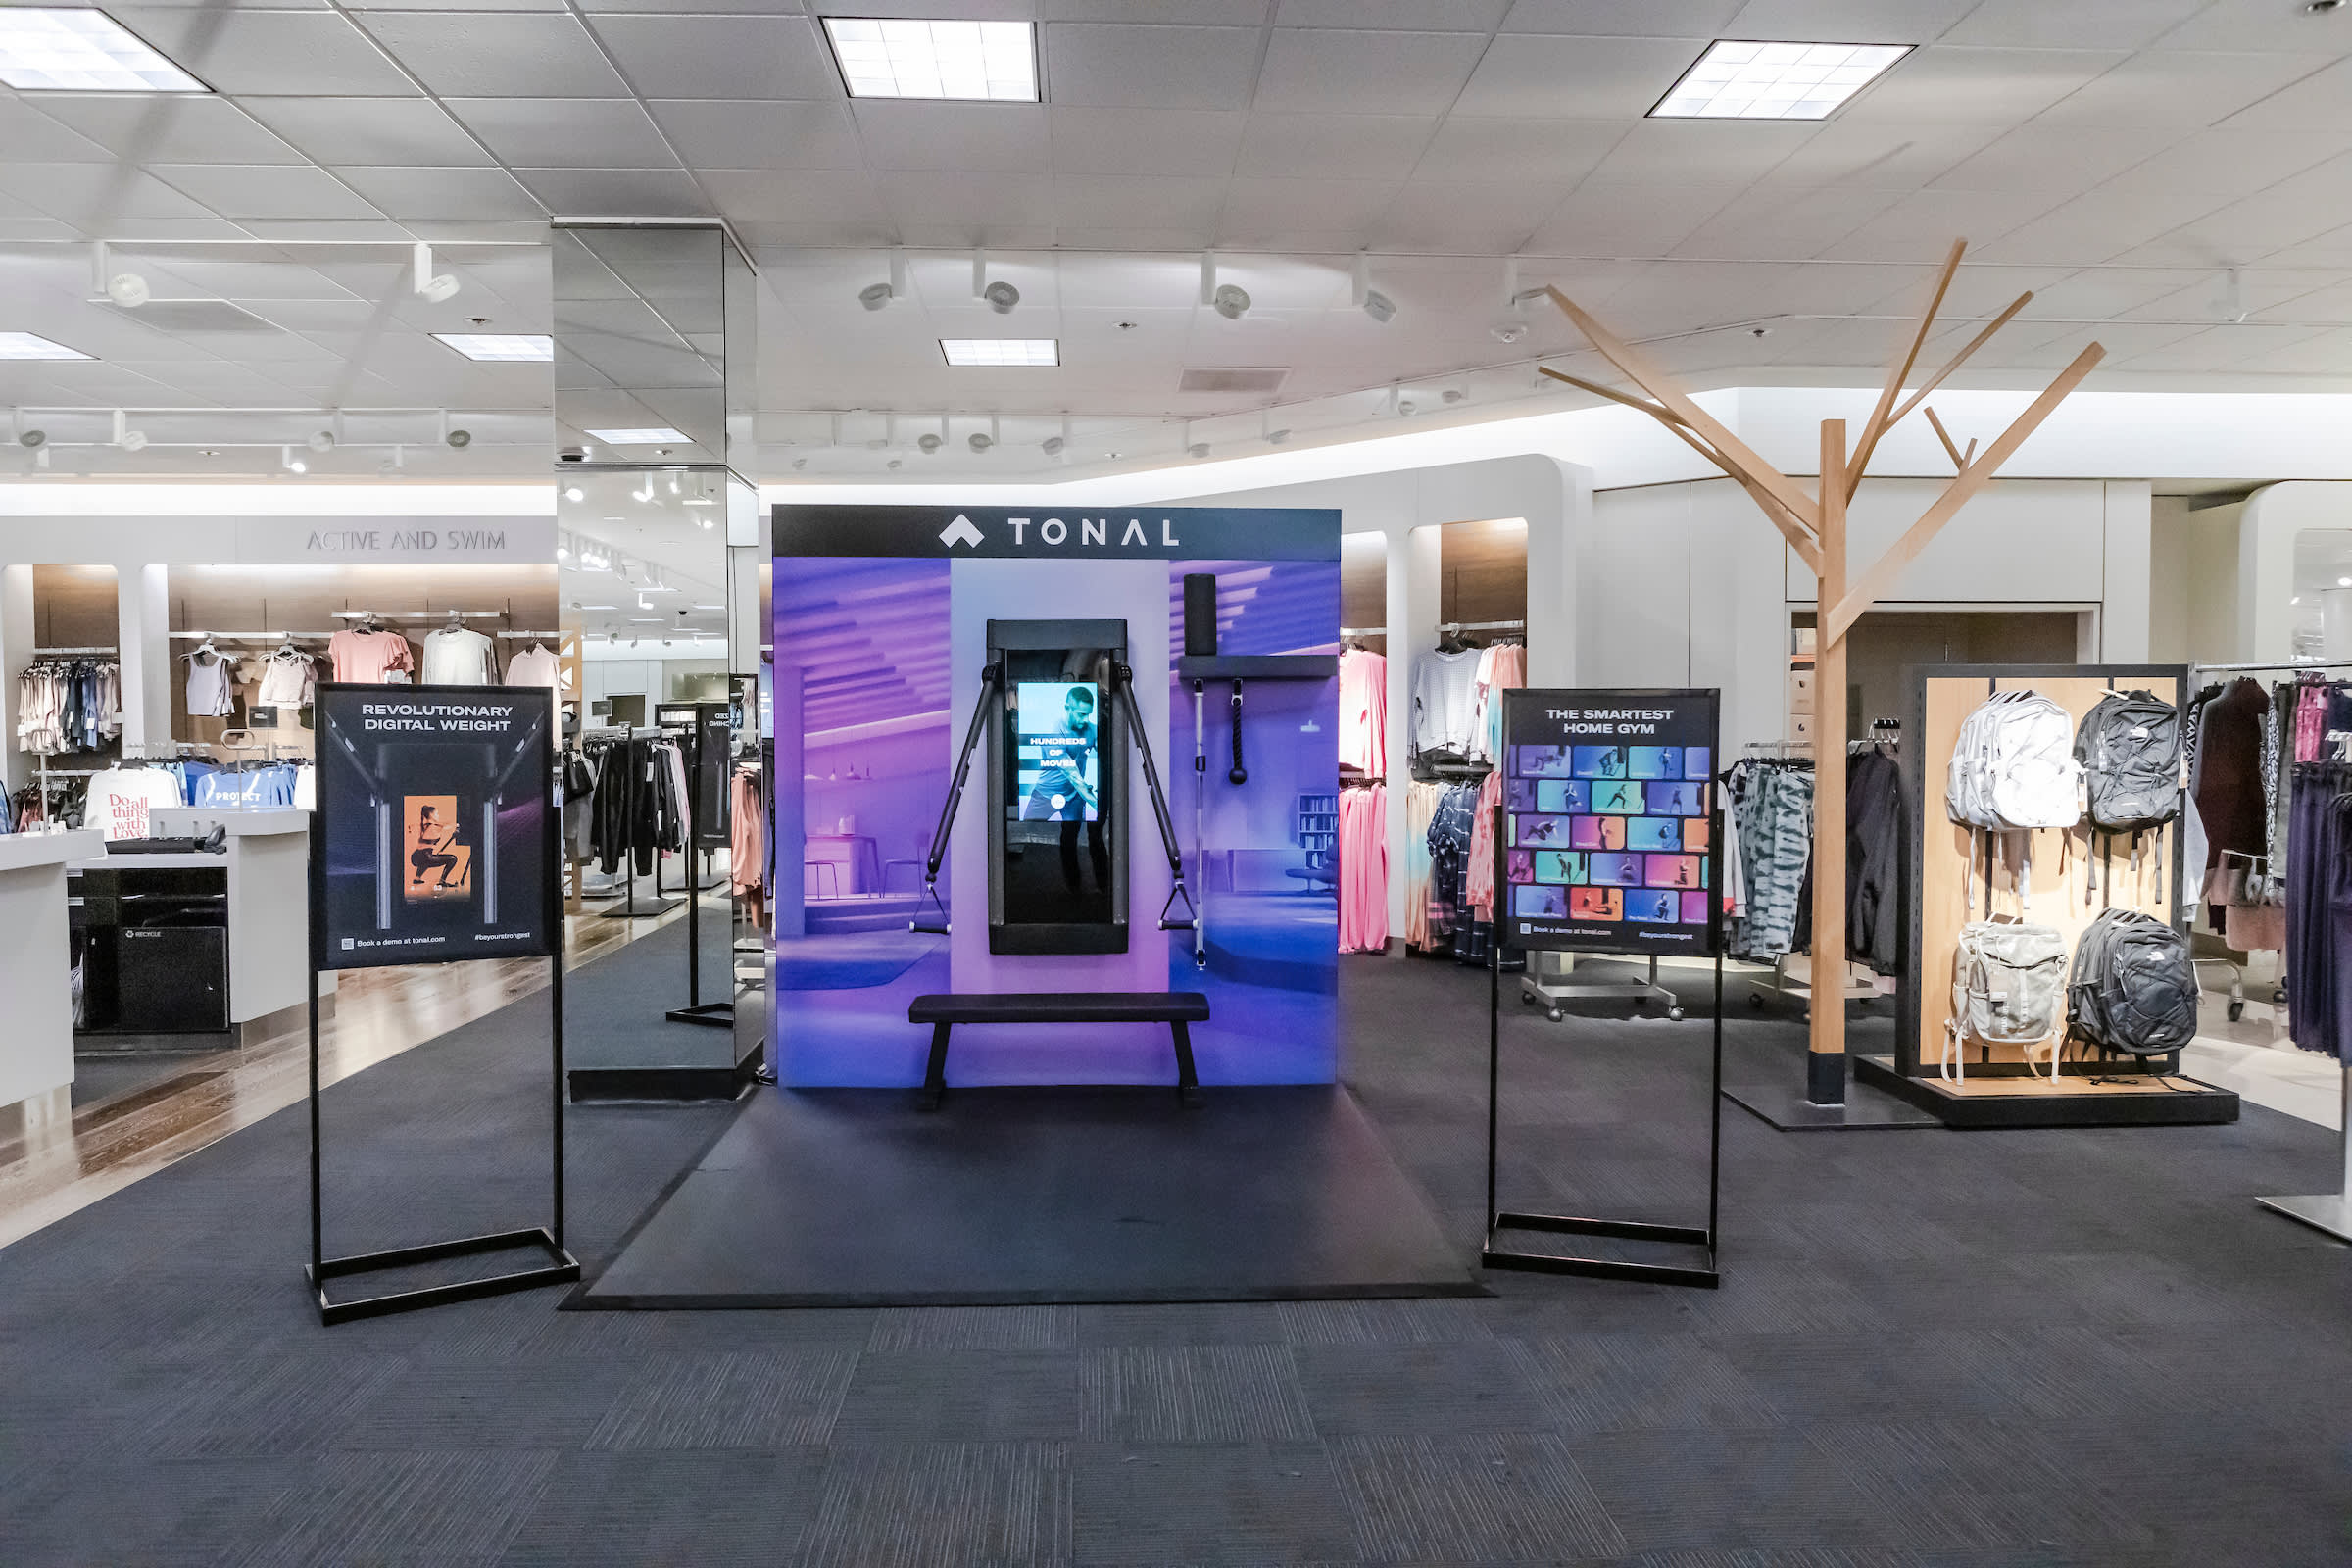 Nordstrom will add Tonal stores in 40 stores to increase fitness offerings